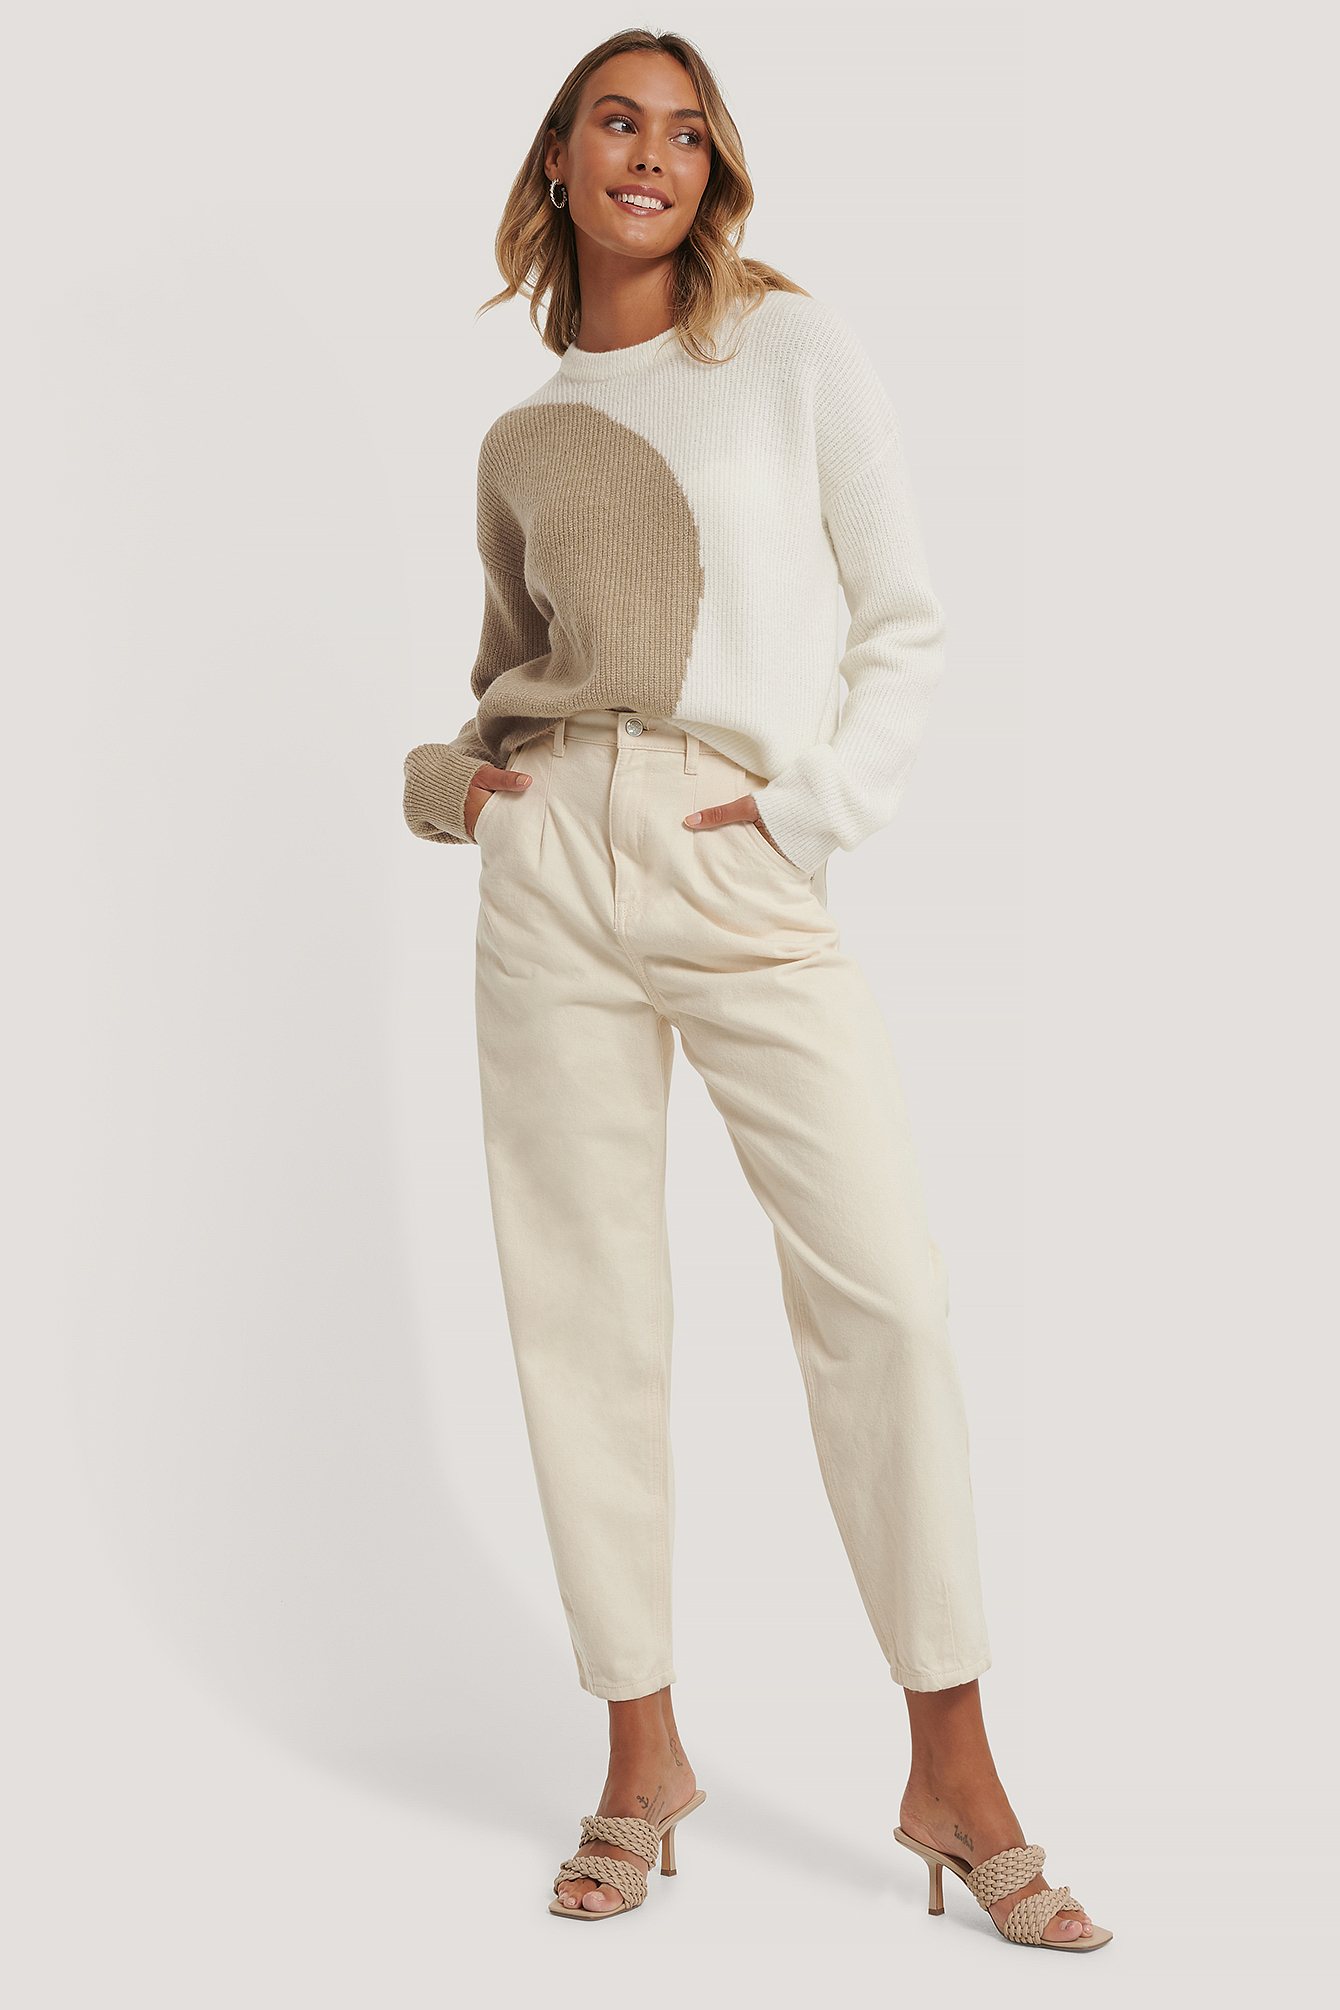 Beige/White Two Colored Knitted Sweater